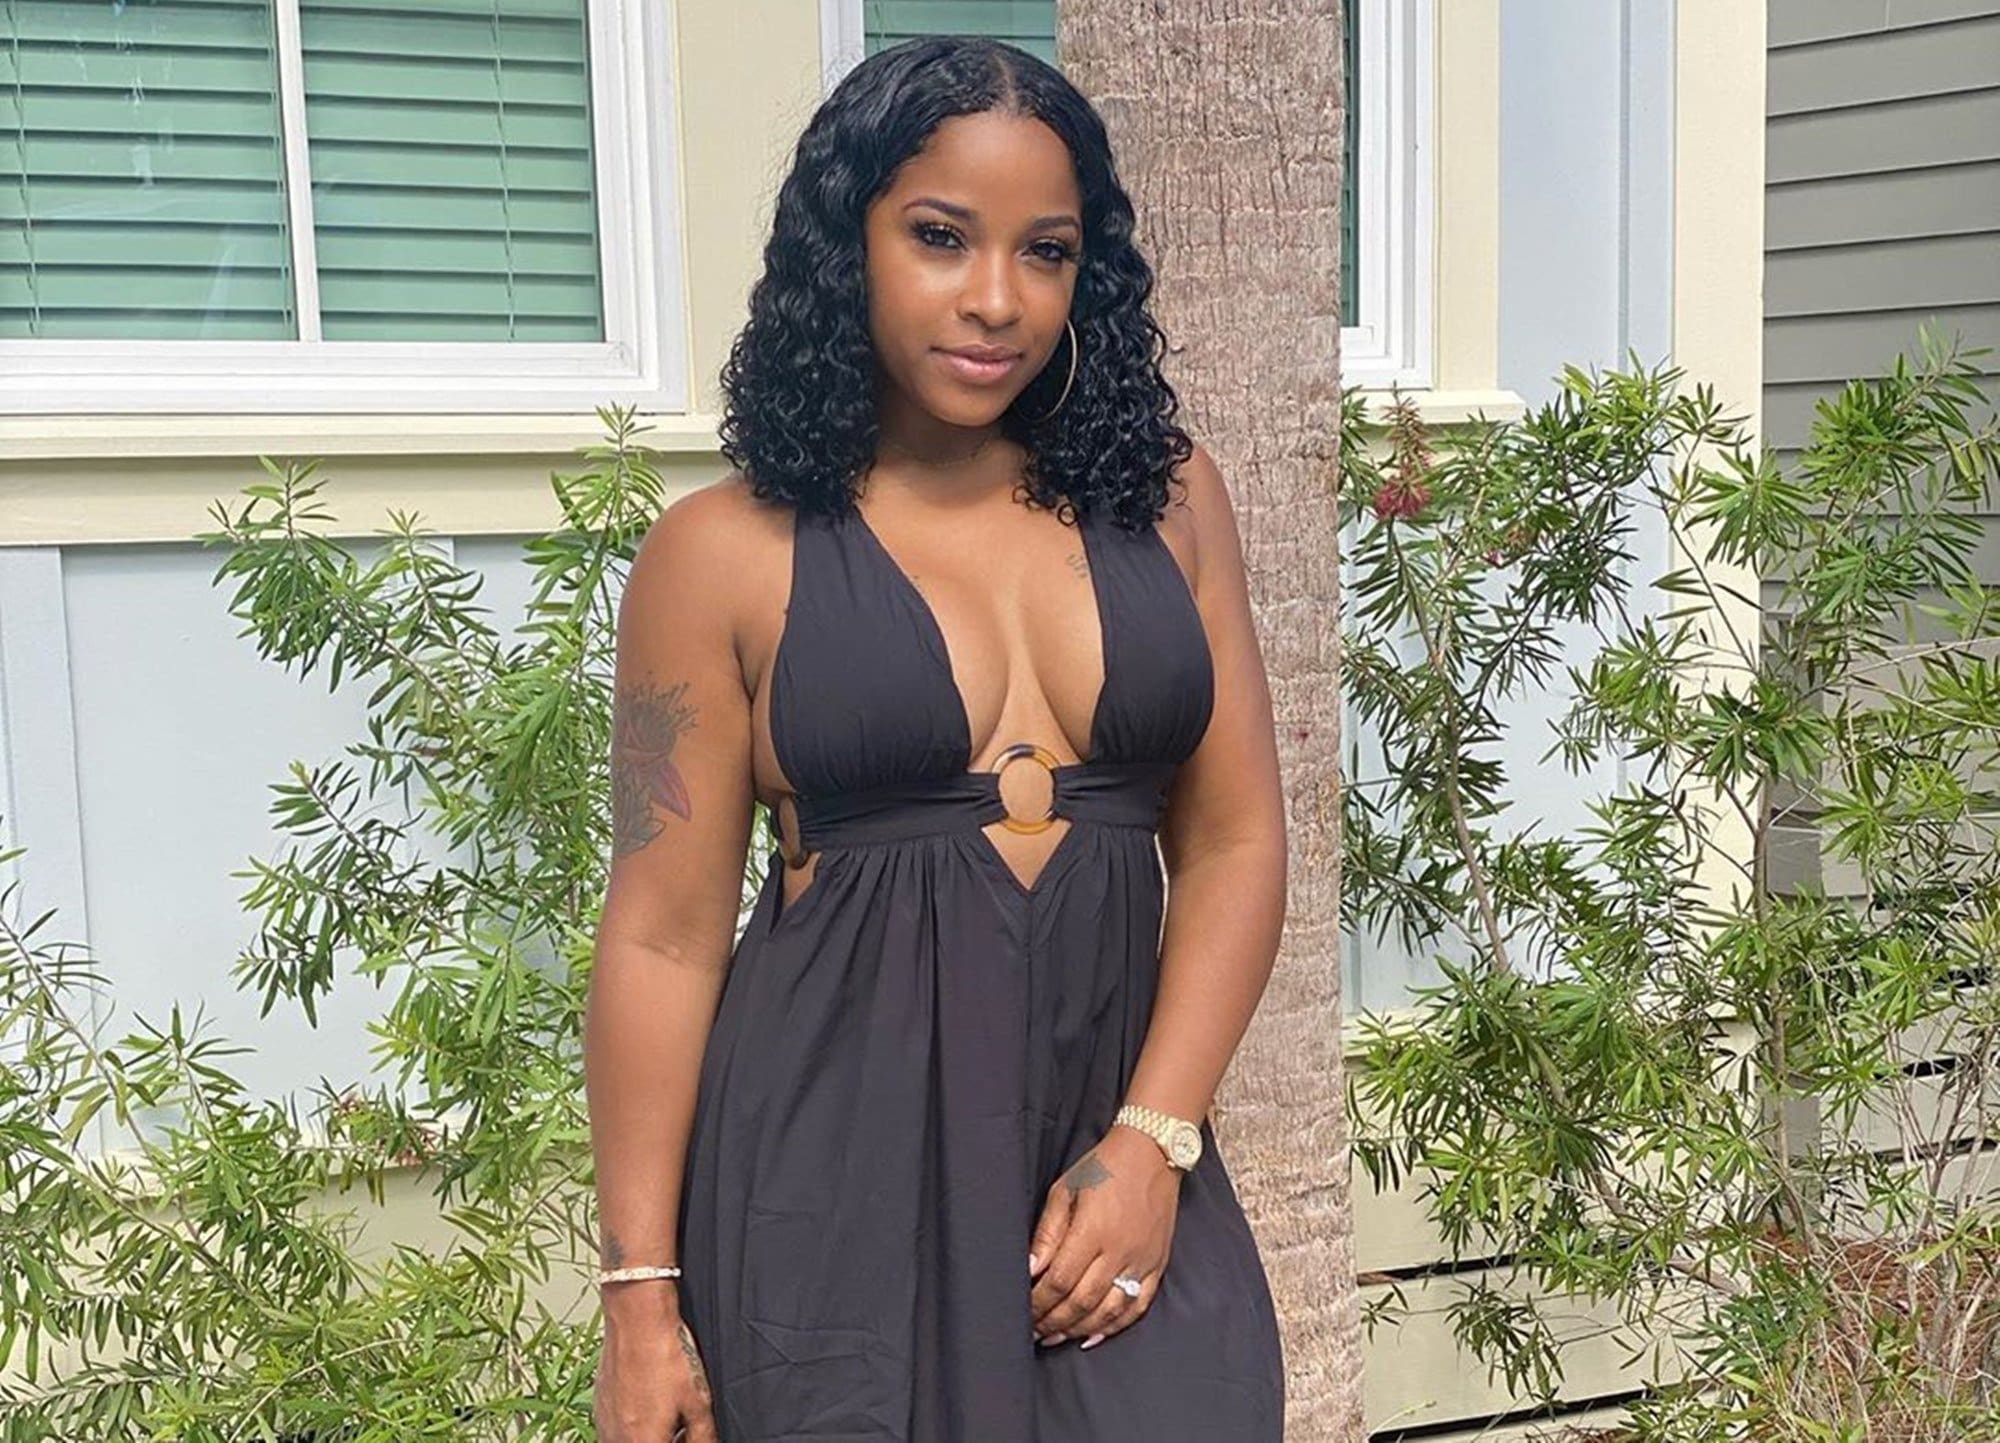 Toya Johnson Shows Off Her Gym Essentials - Check Out Her Clip